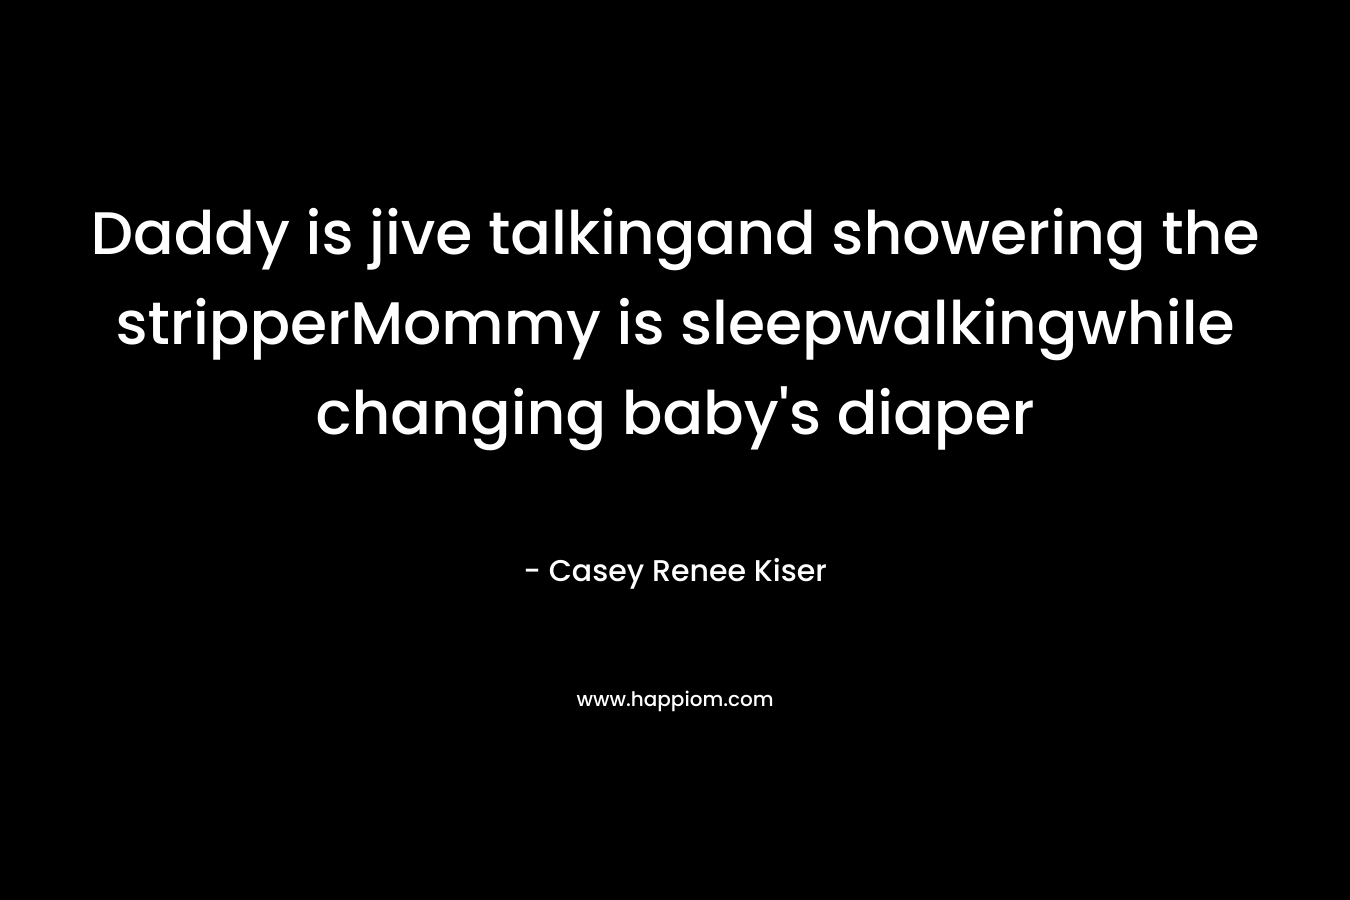 Daddy is jive talkingand showering the stripperMommy is sleepwalkingwhile changing baby's diaper